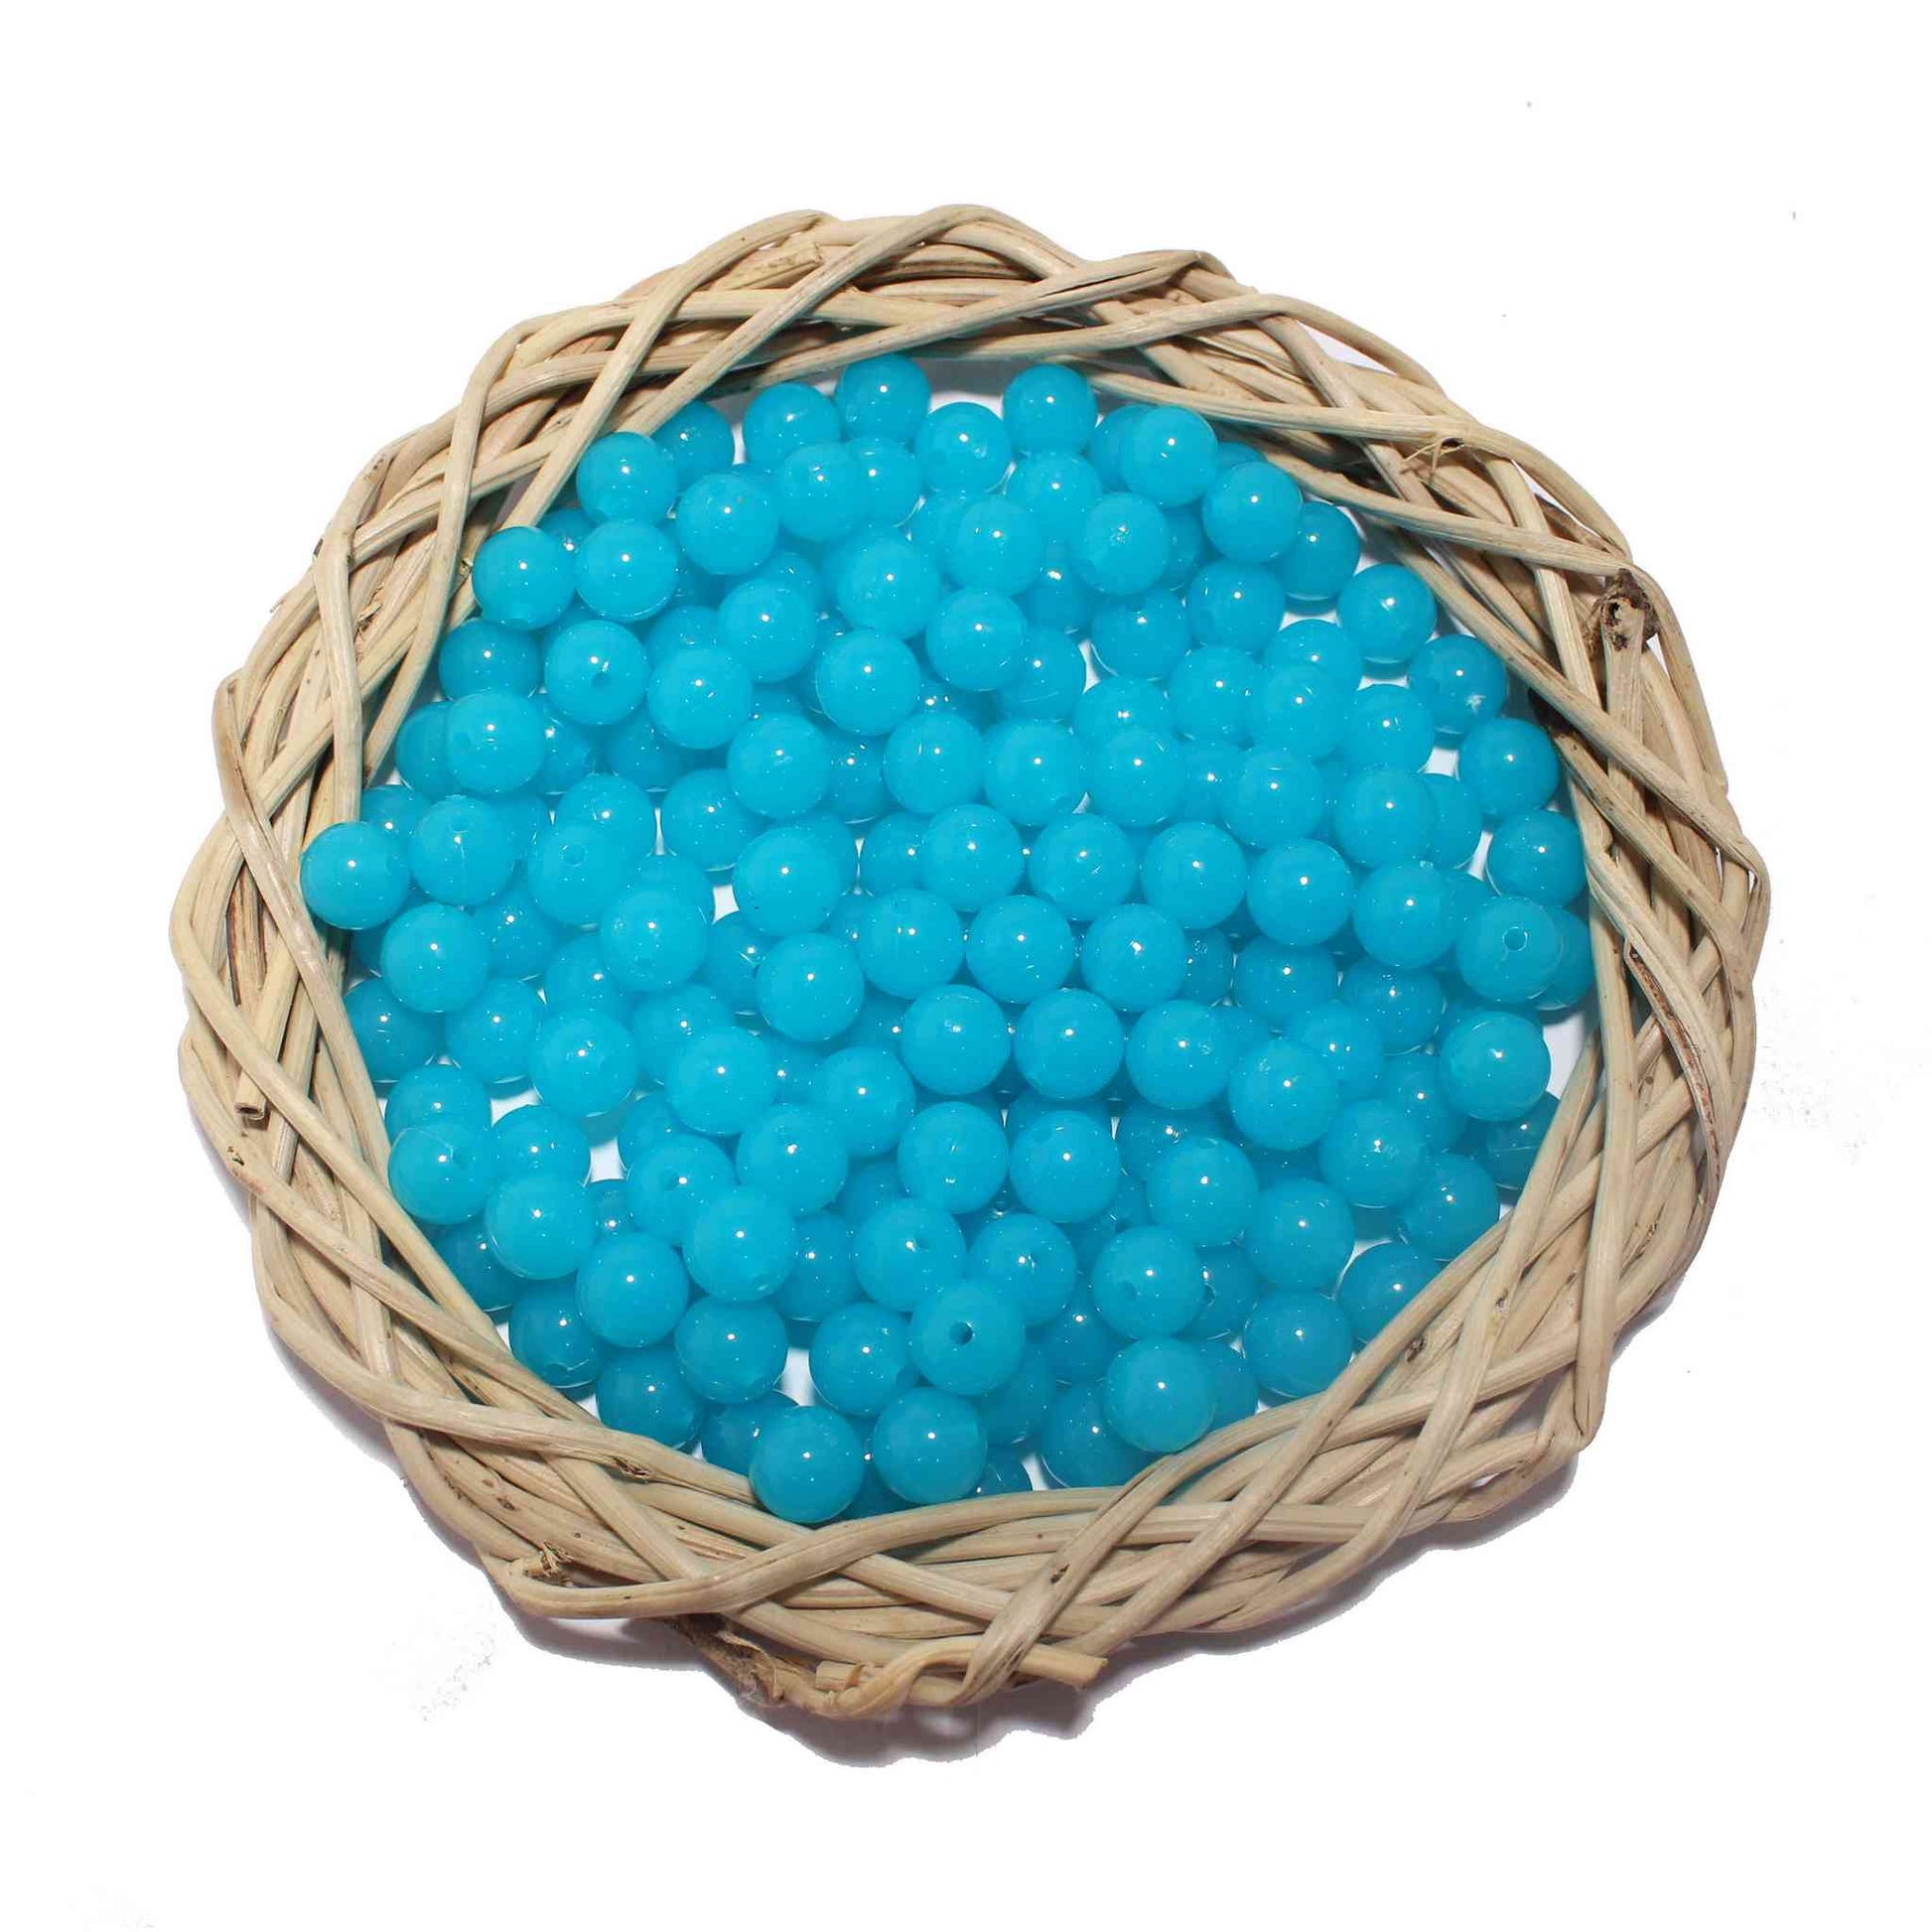 Premium quality Round Glass Beads for DIY Craft, Trousseau Packing or Decoration - Design 734, Dodger Blue - Indian Petals